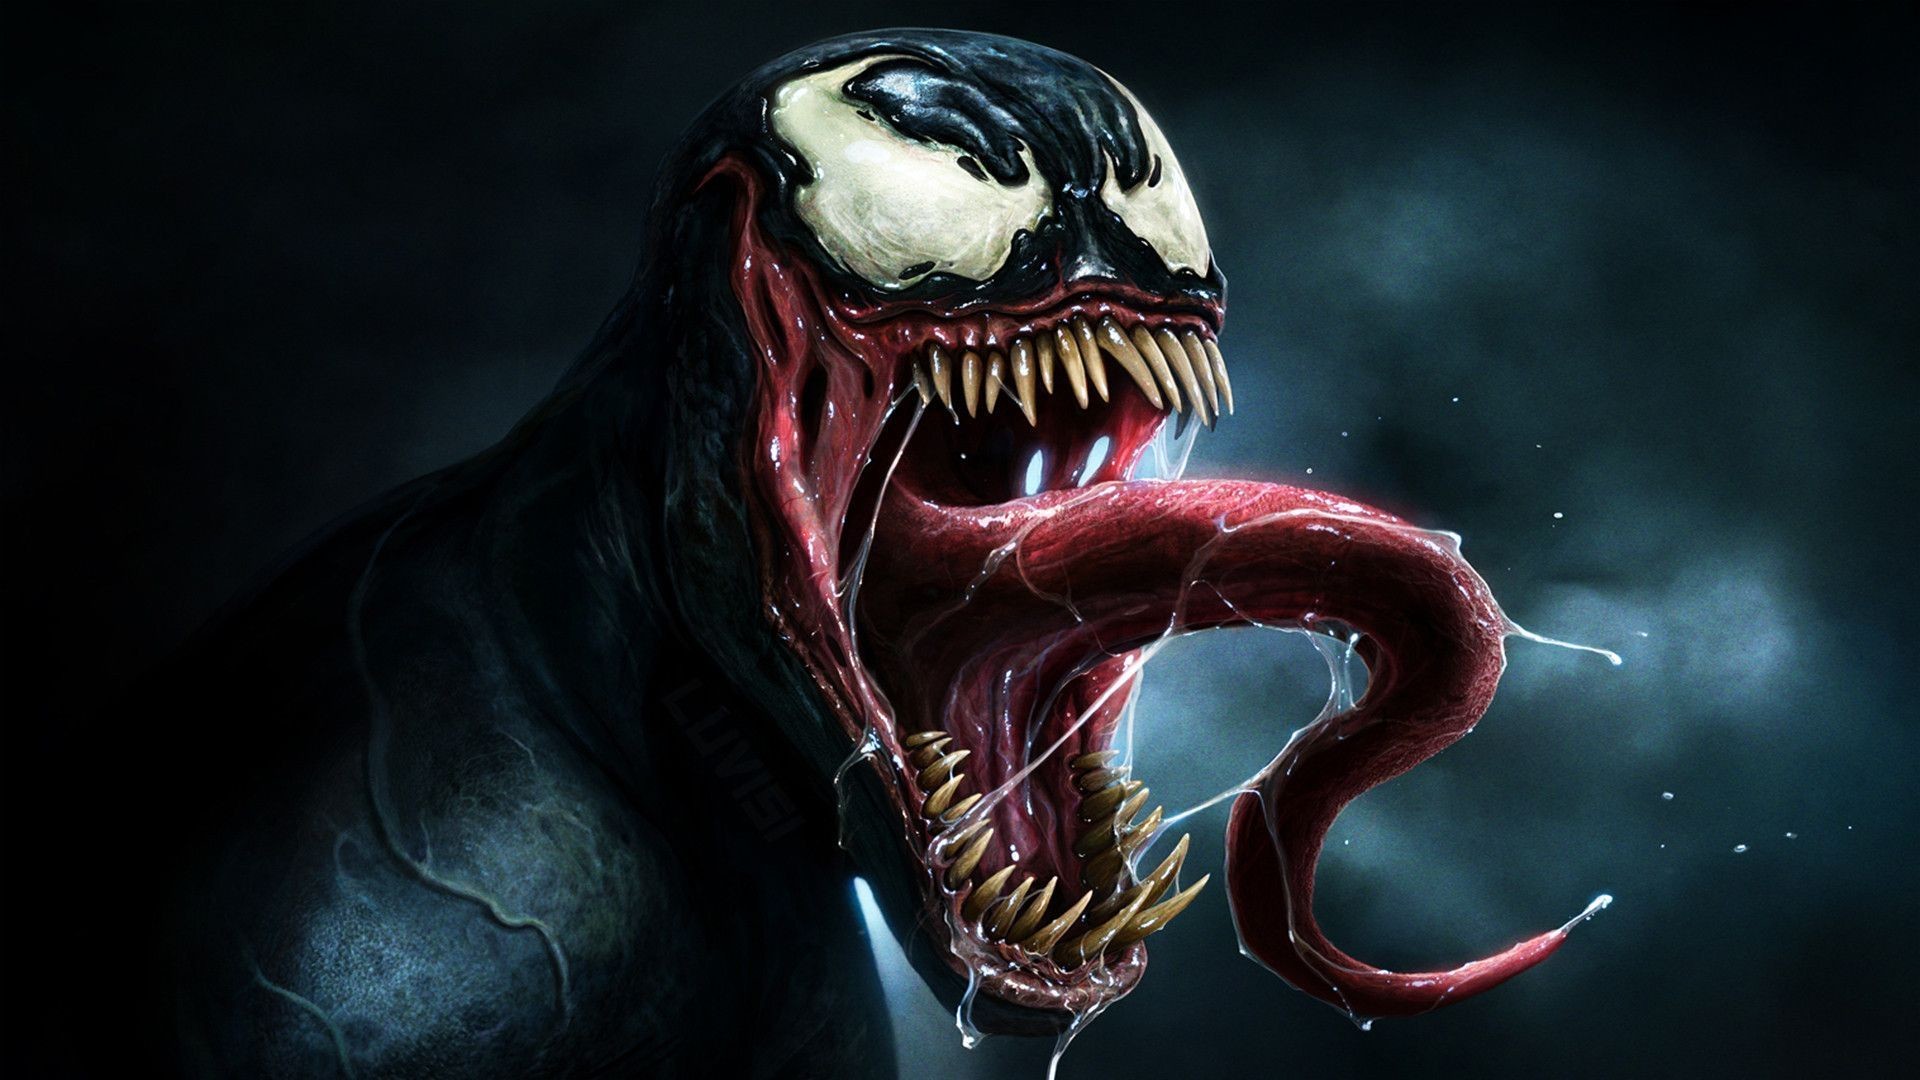 sick wallpapers hd,supervillain,fictional character,tooth,jaw,mouth